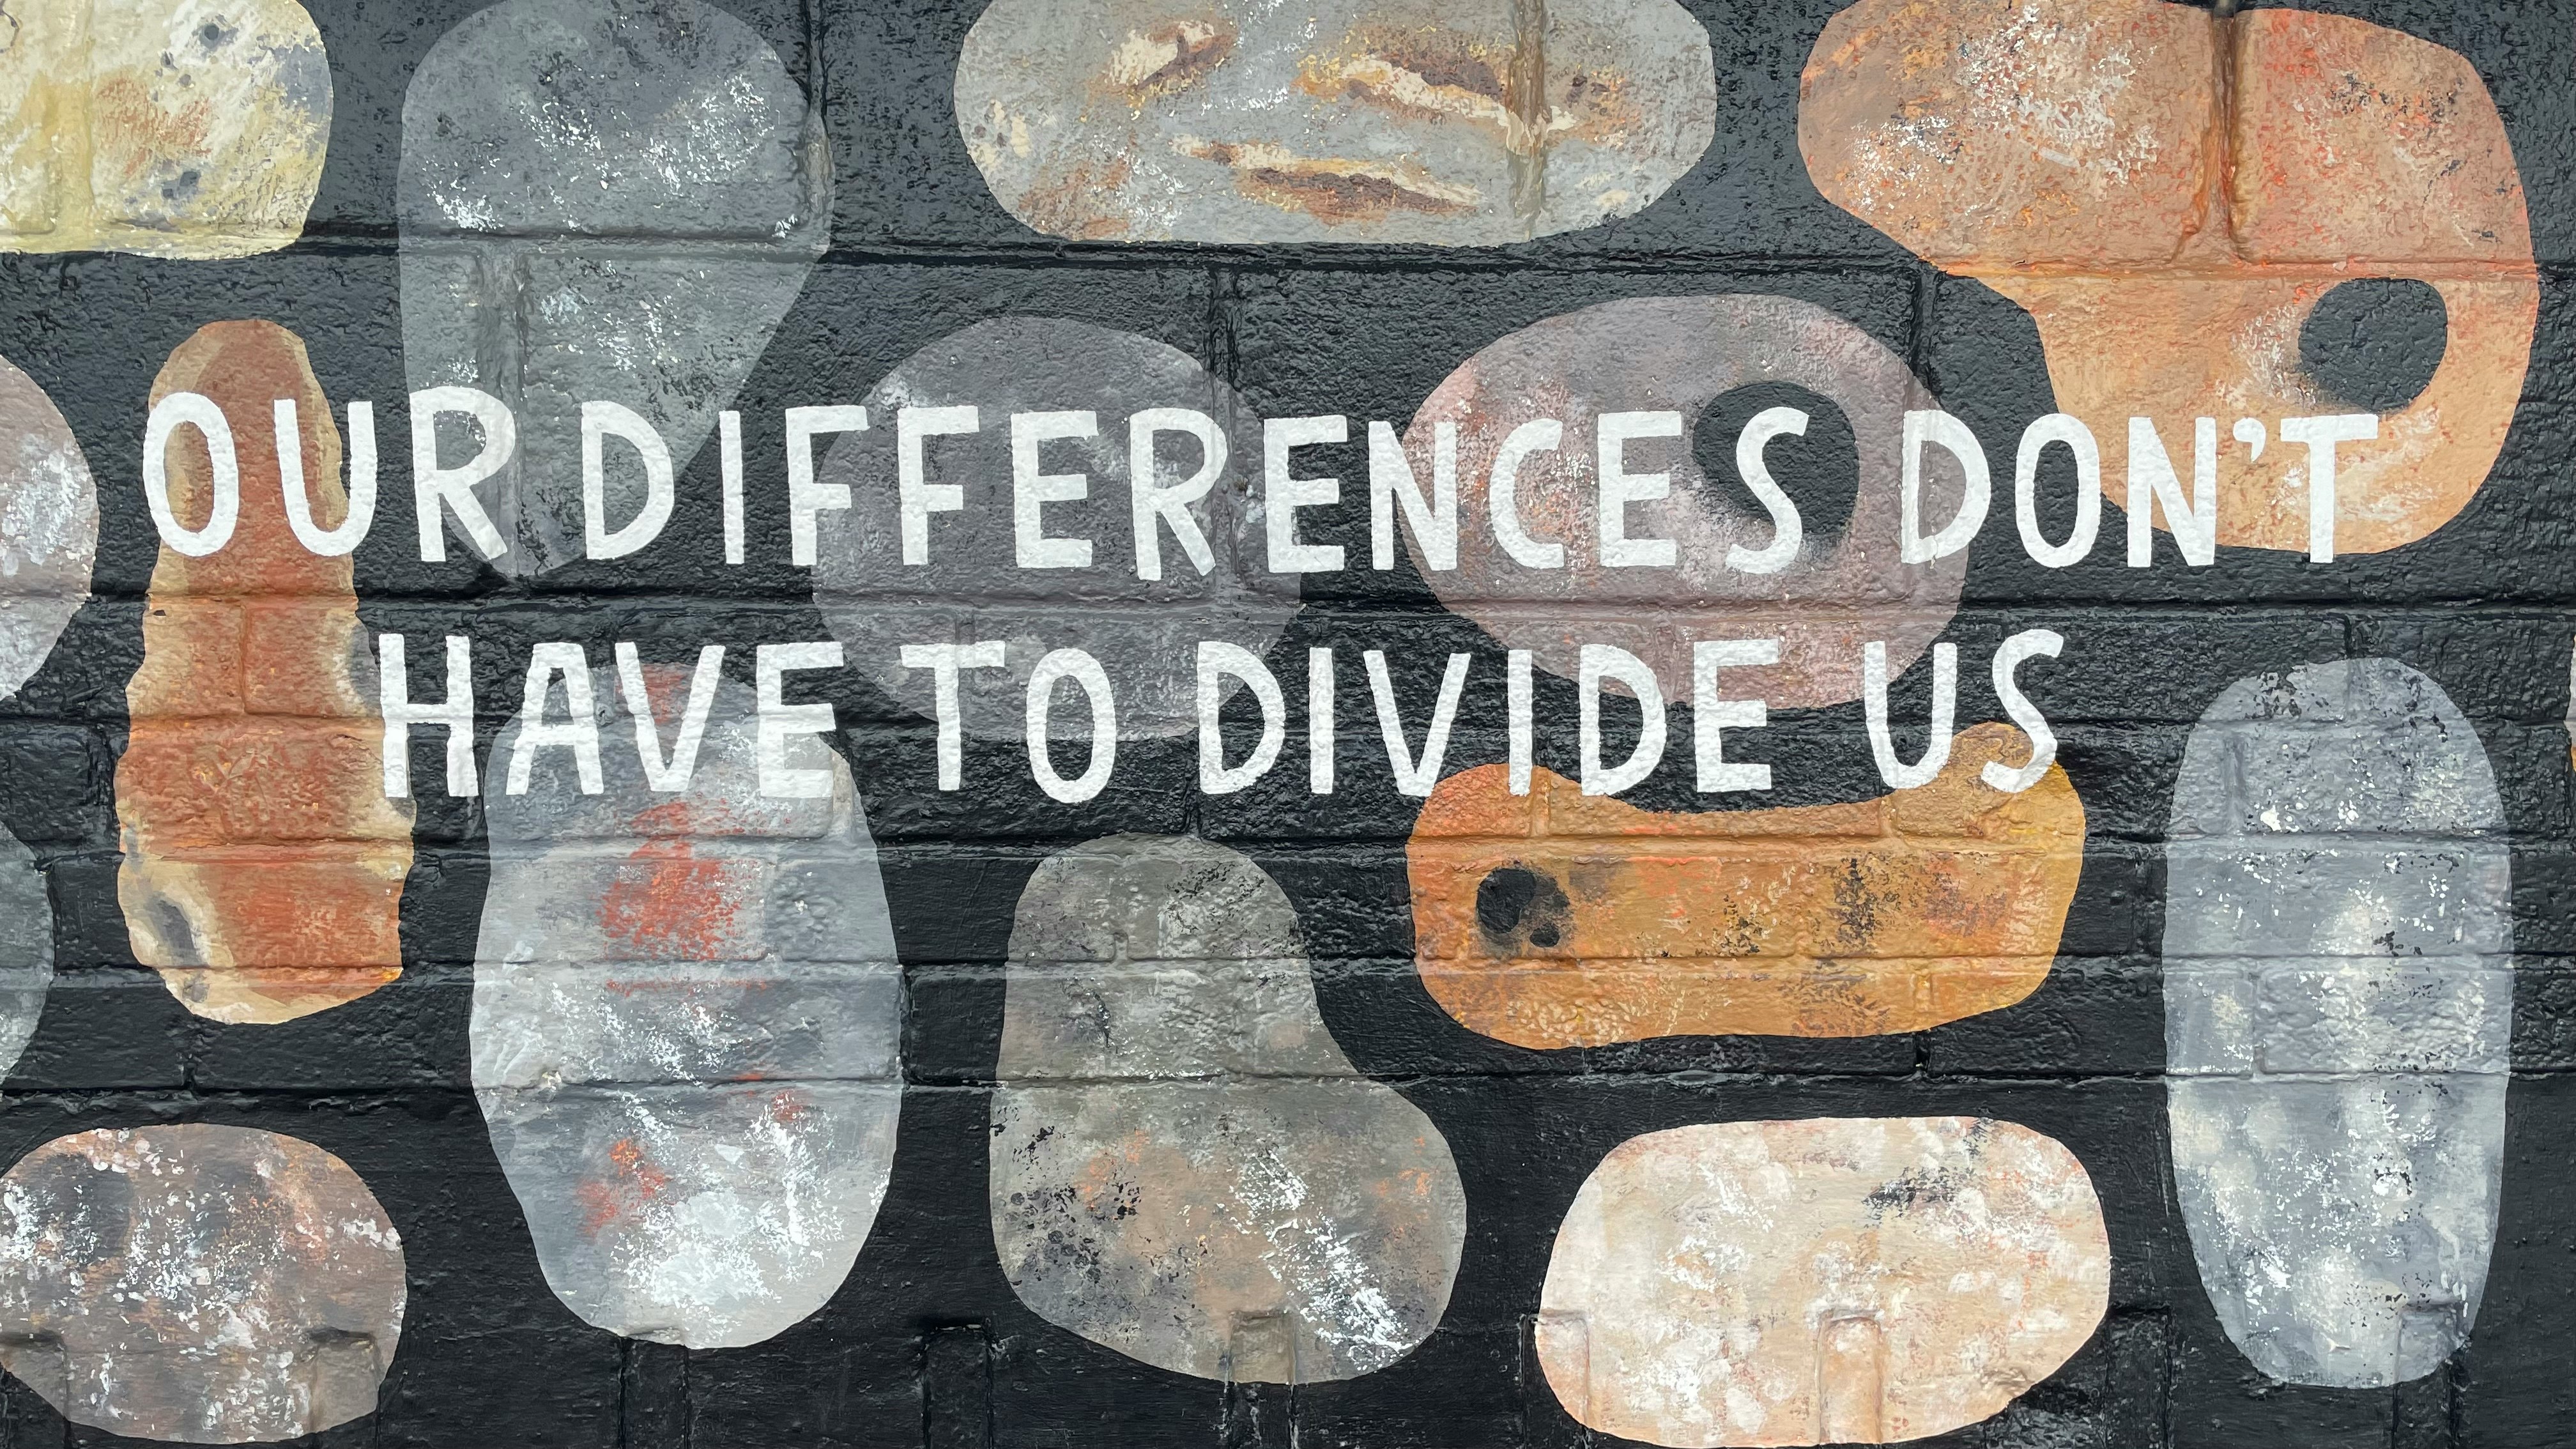 If only our differences didn’t have to divide us and that we could all live in peace.   Accept one another for who we are.  